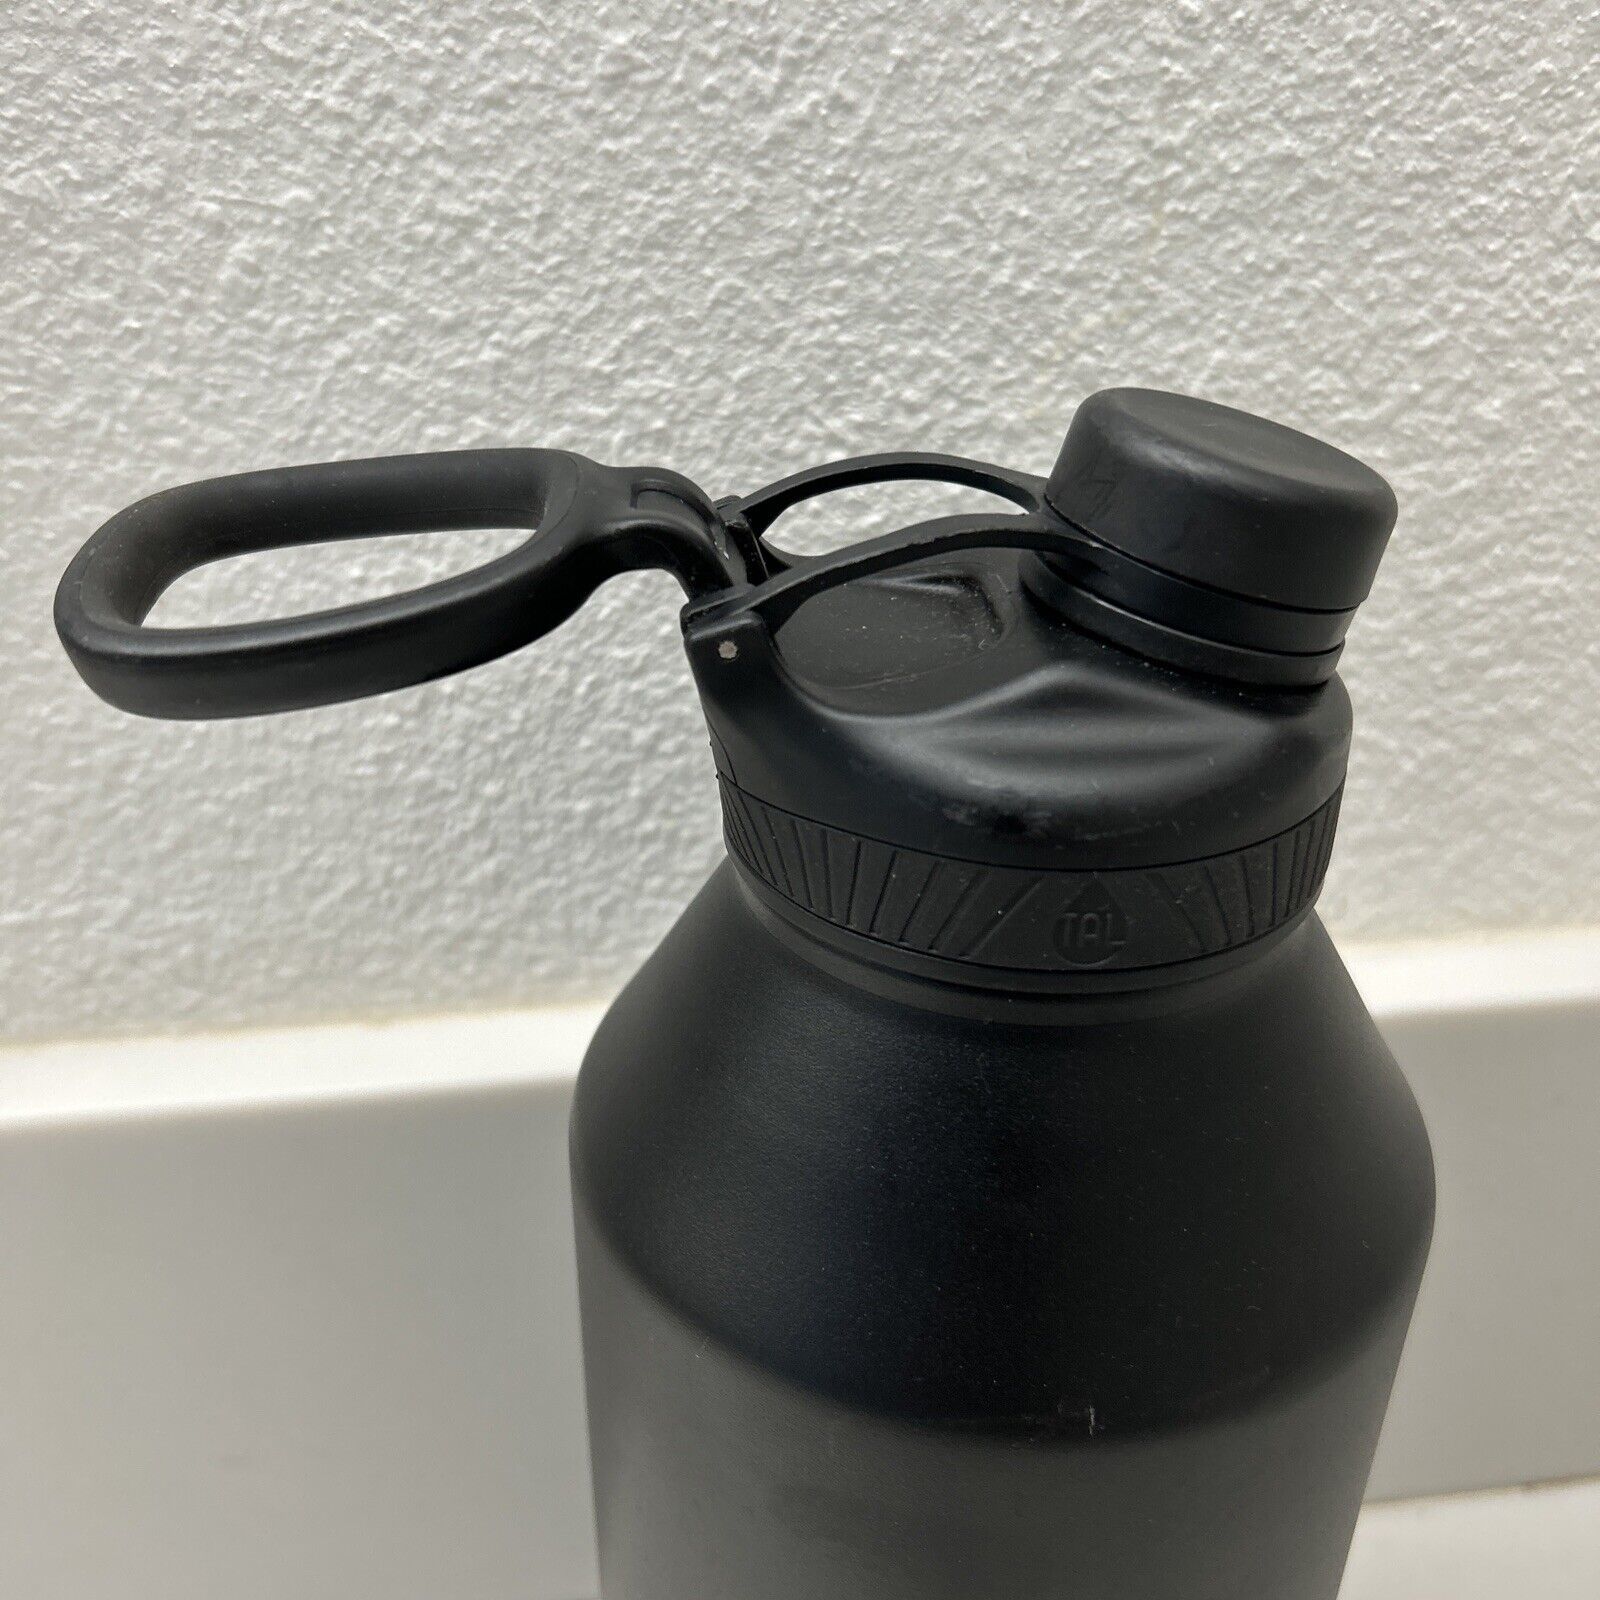 Where can I buy a replacement lid for this TAL 64oz water bottle